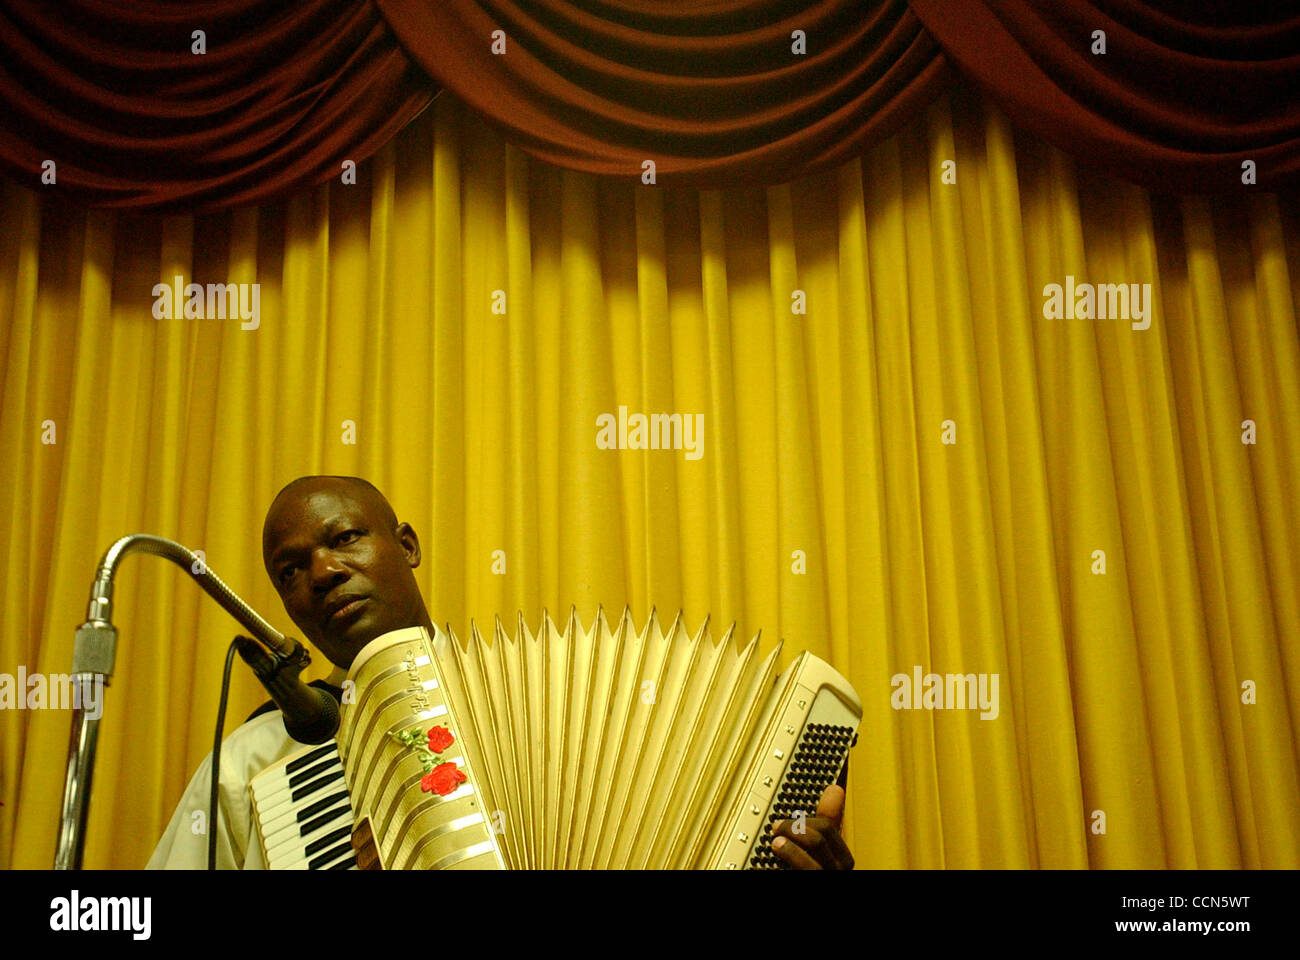 Aug 17, 2004; Miami, FL, USA; Haitian Jude Cesaire provides music as the congregation sings together during a revival service at the Haitian Baptist Church of the Living God in the Little Haiti neighborhood of Miami, FL on Tuesday, August 17, 2004. Stock Photo